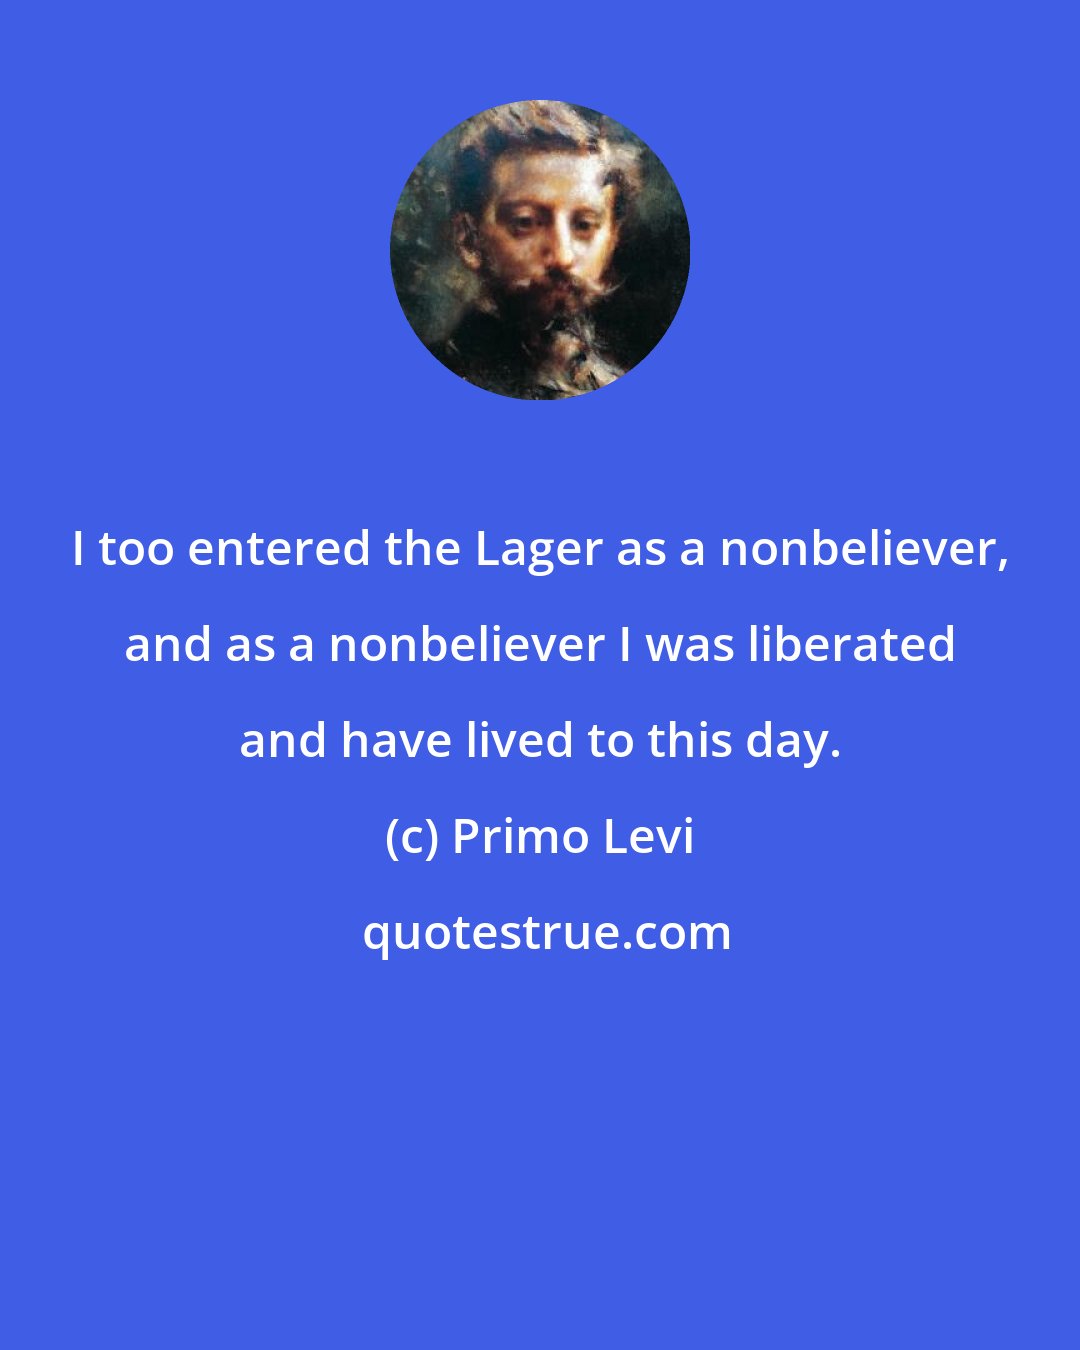 Primo Levi: I too entered the Lager as a nonbeliever, and as a nonbeliever I was liberated and have lived to this day.